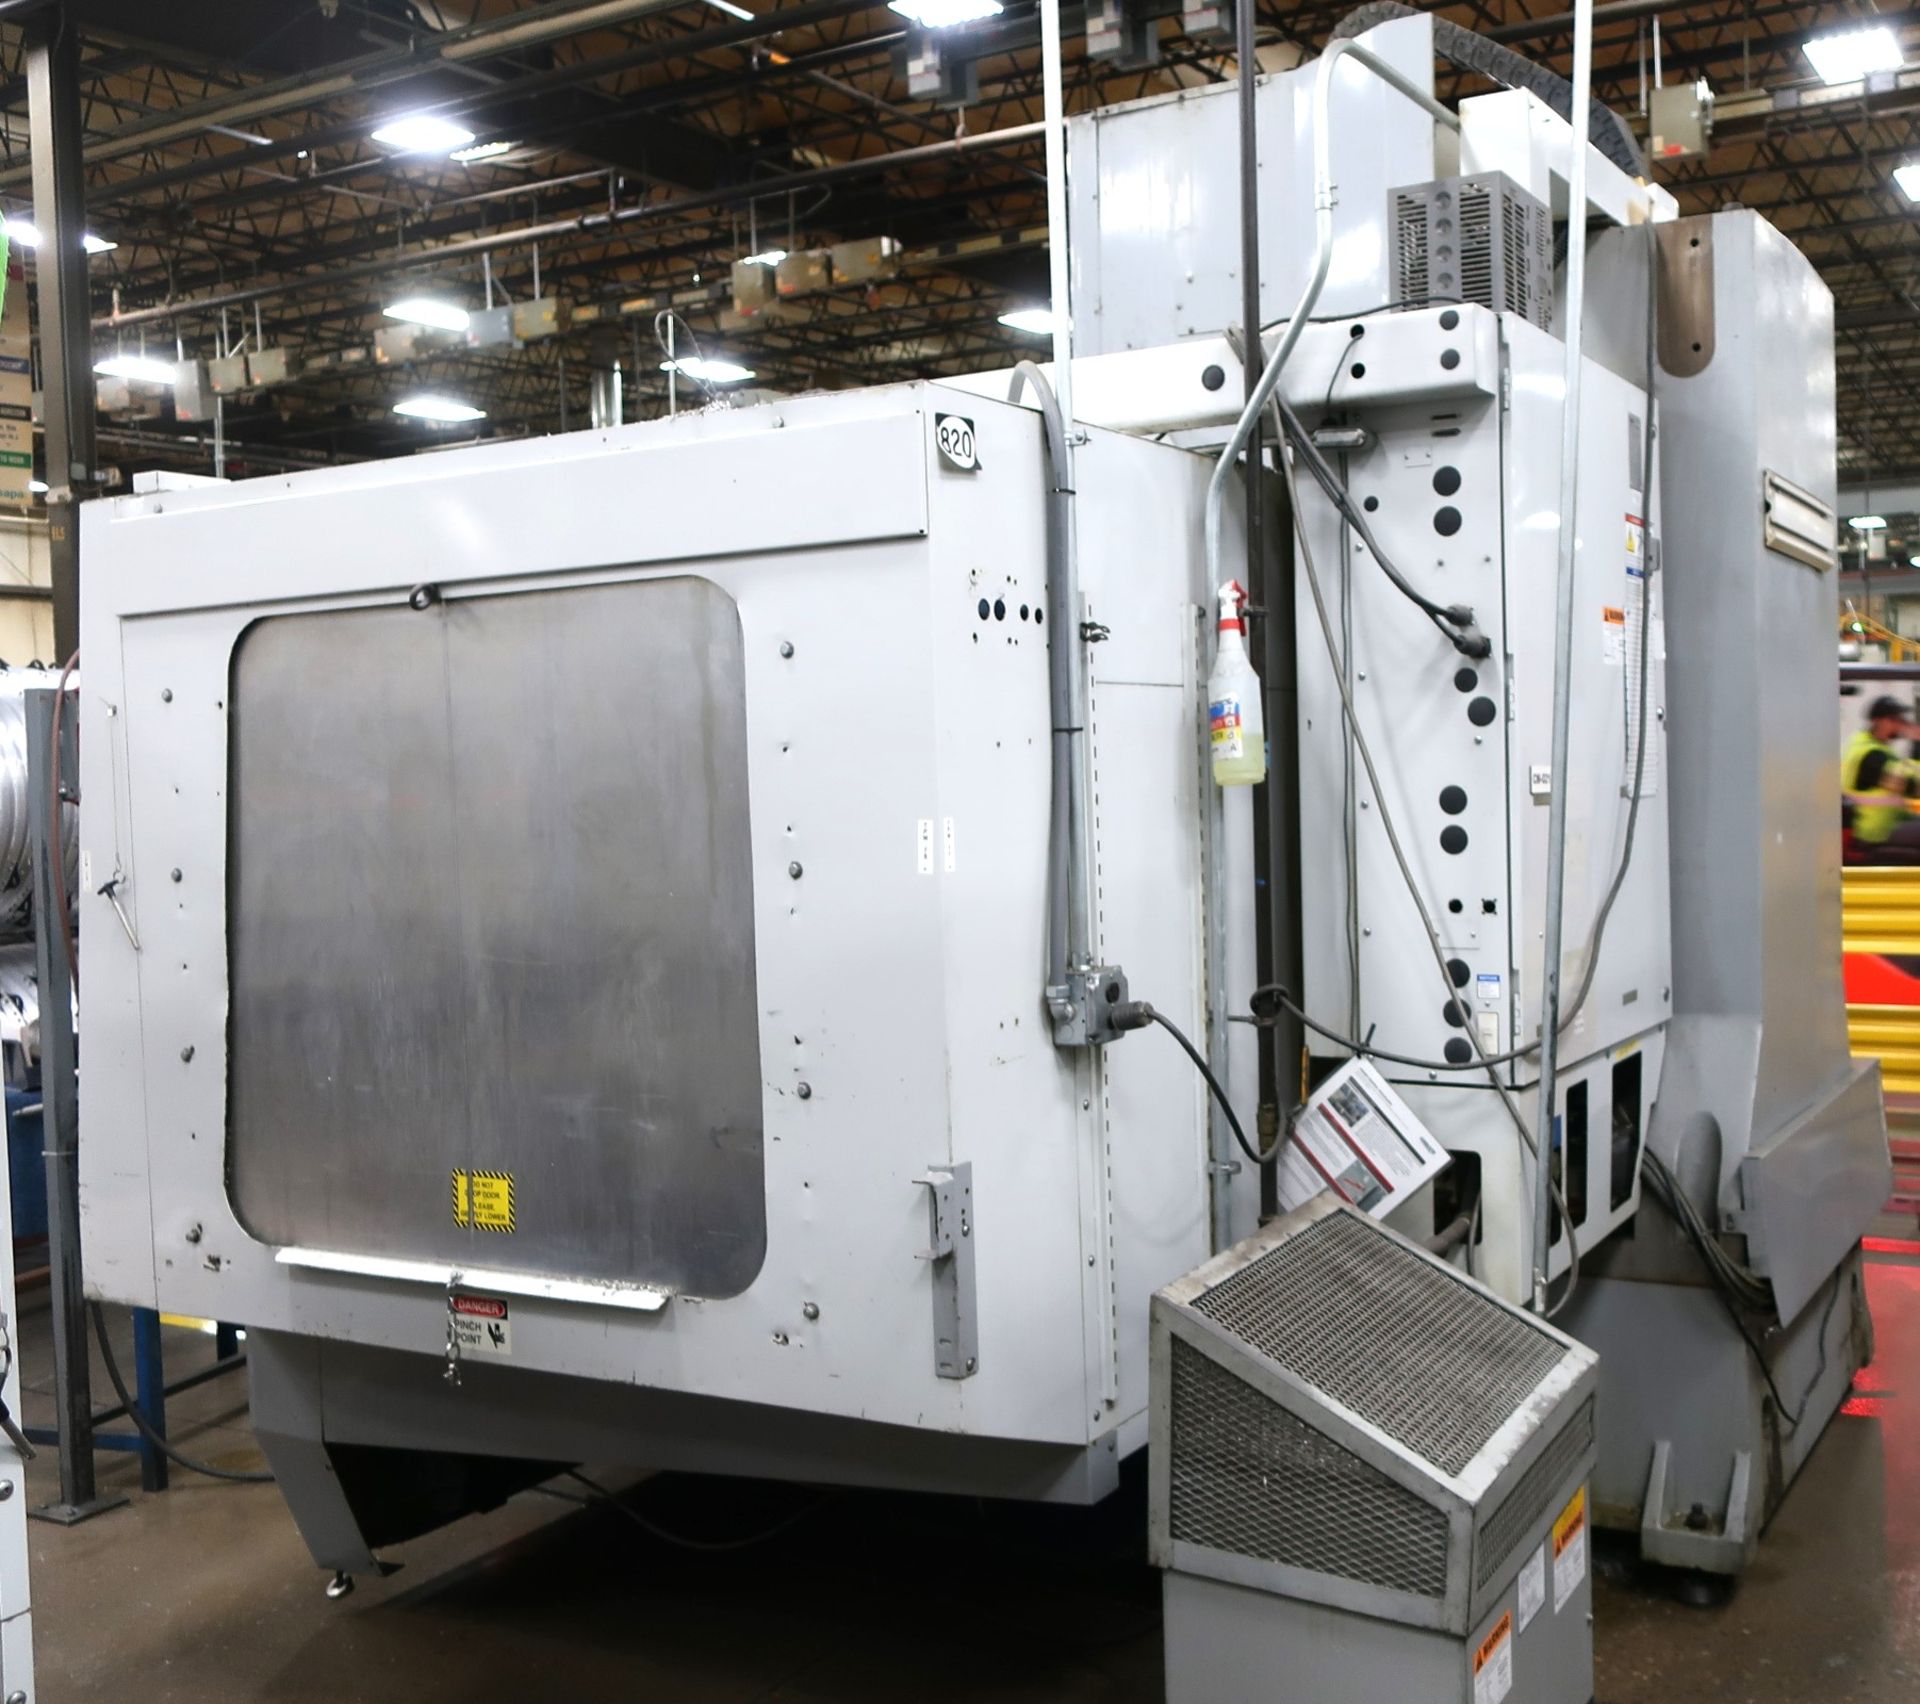 HAAS VF-7/40 CNC 3-AXIS CNC VERTICAL MACHINING CENTER, NEW 2008 - Image 11 of 20